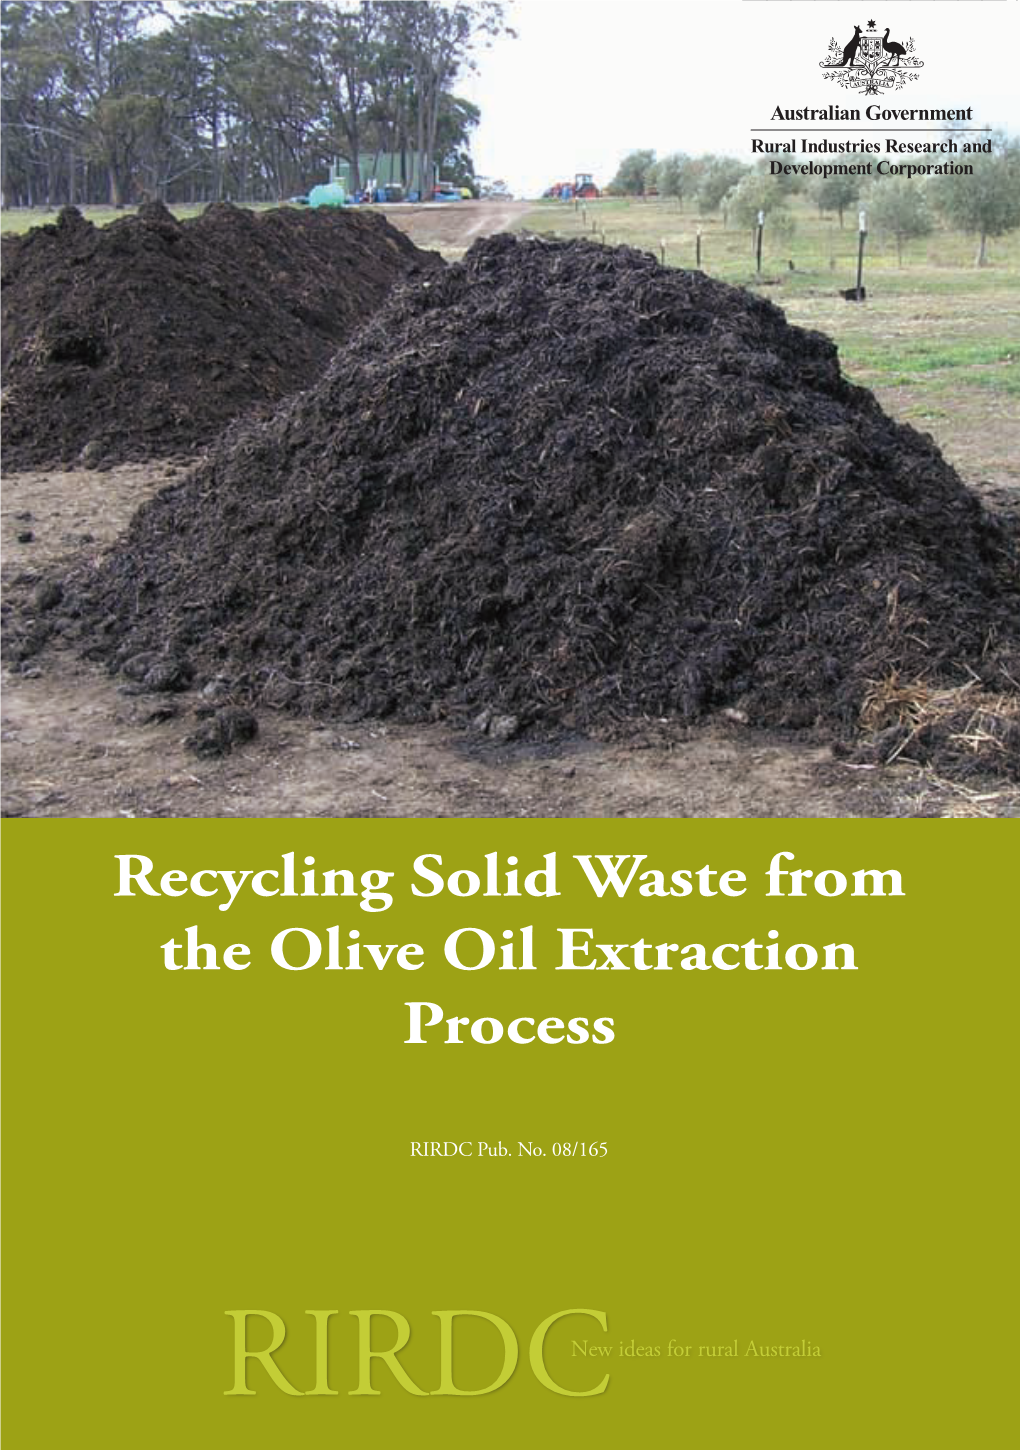 Recycling Solid Waste from the Olive Oil Extraction Process